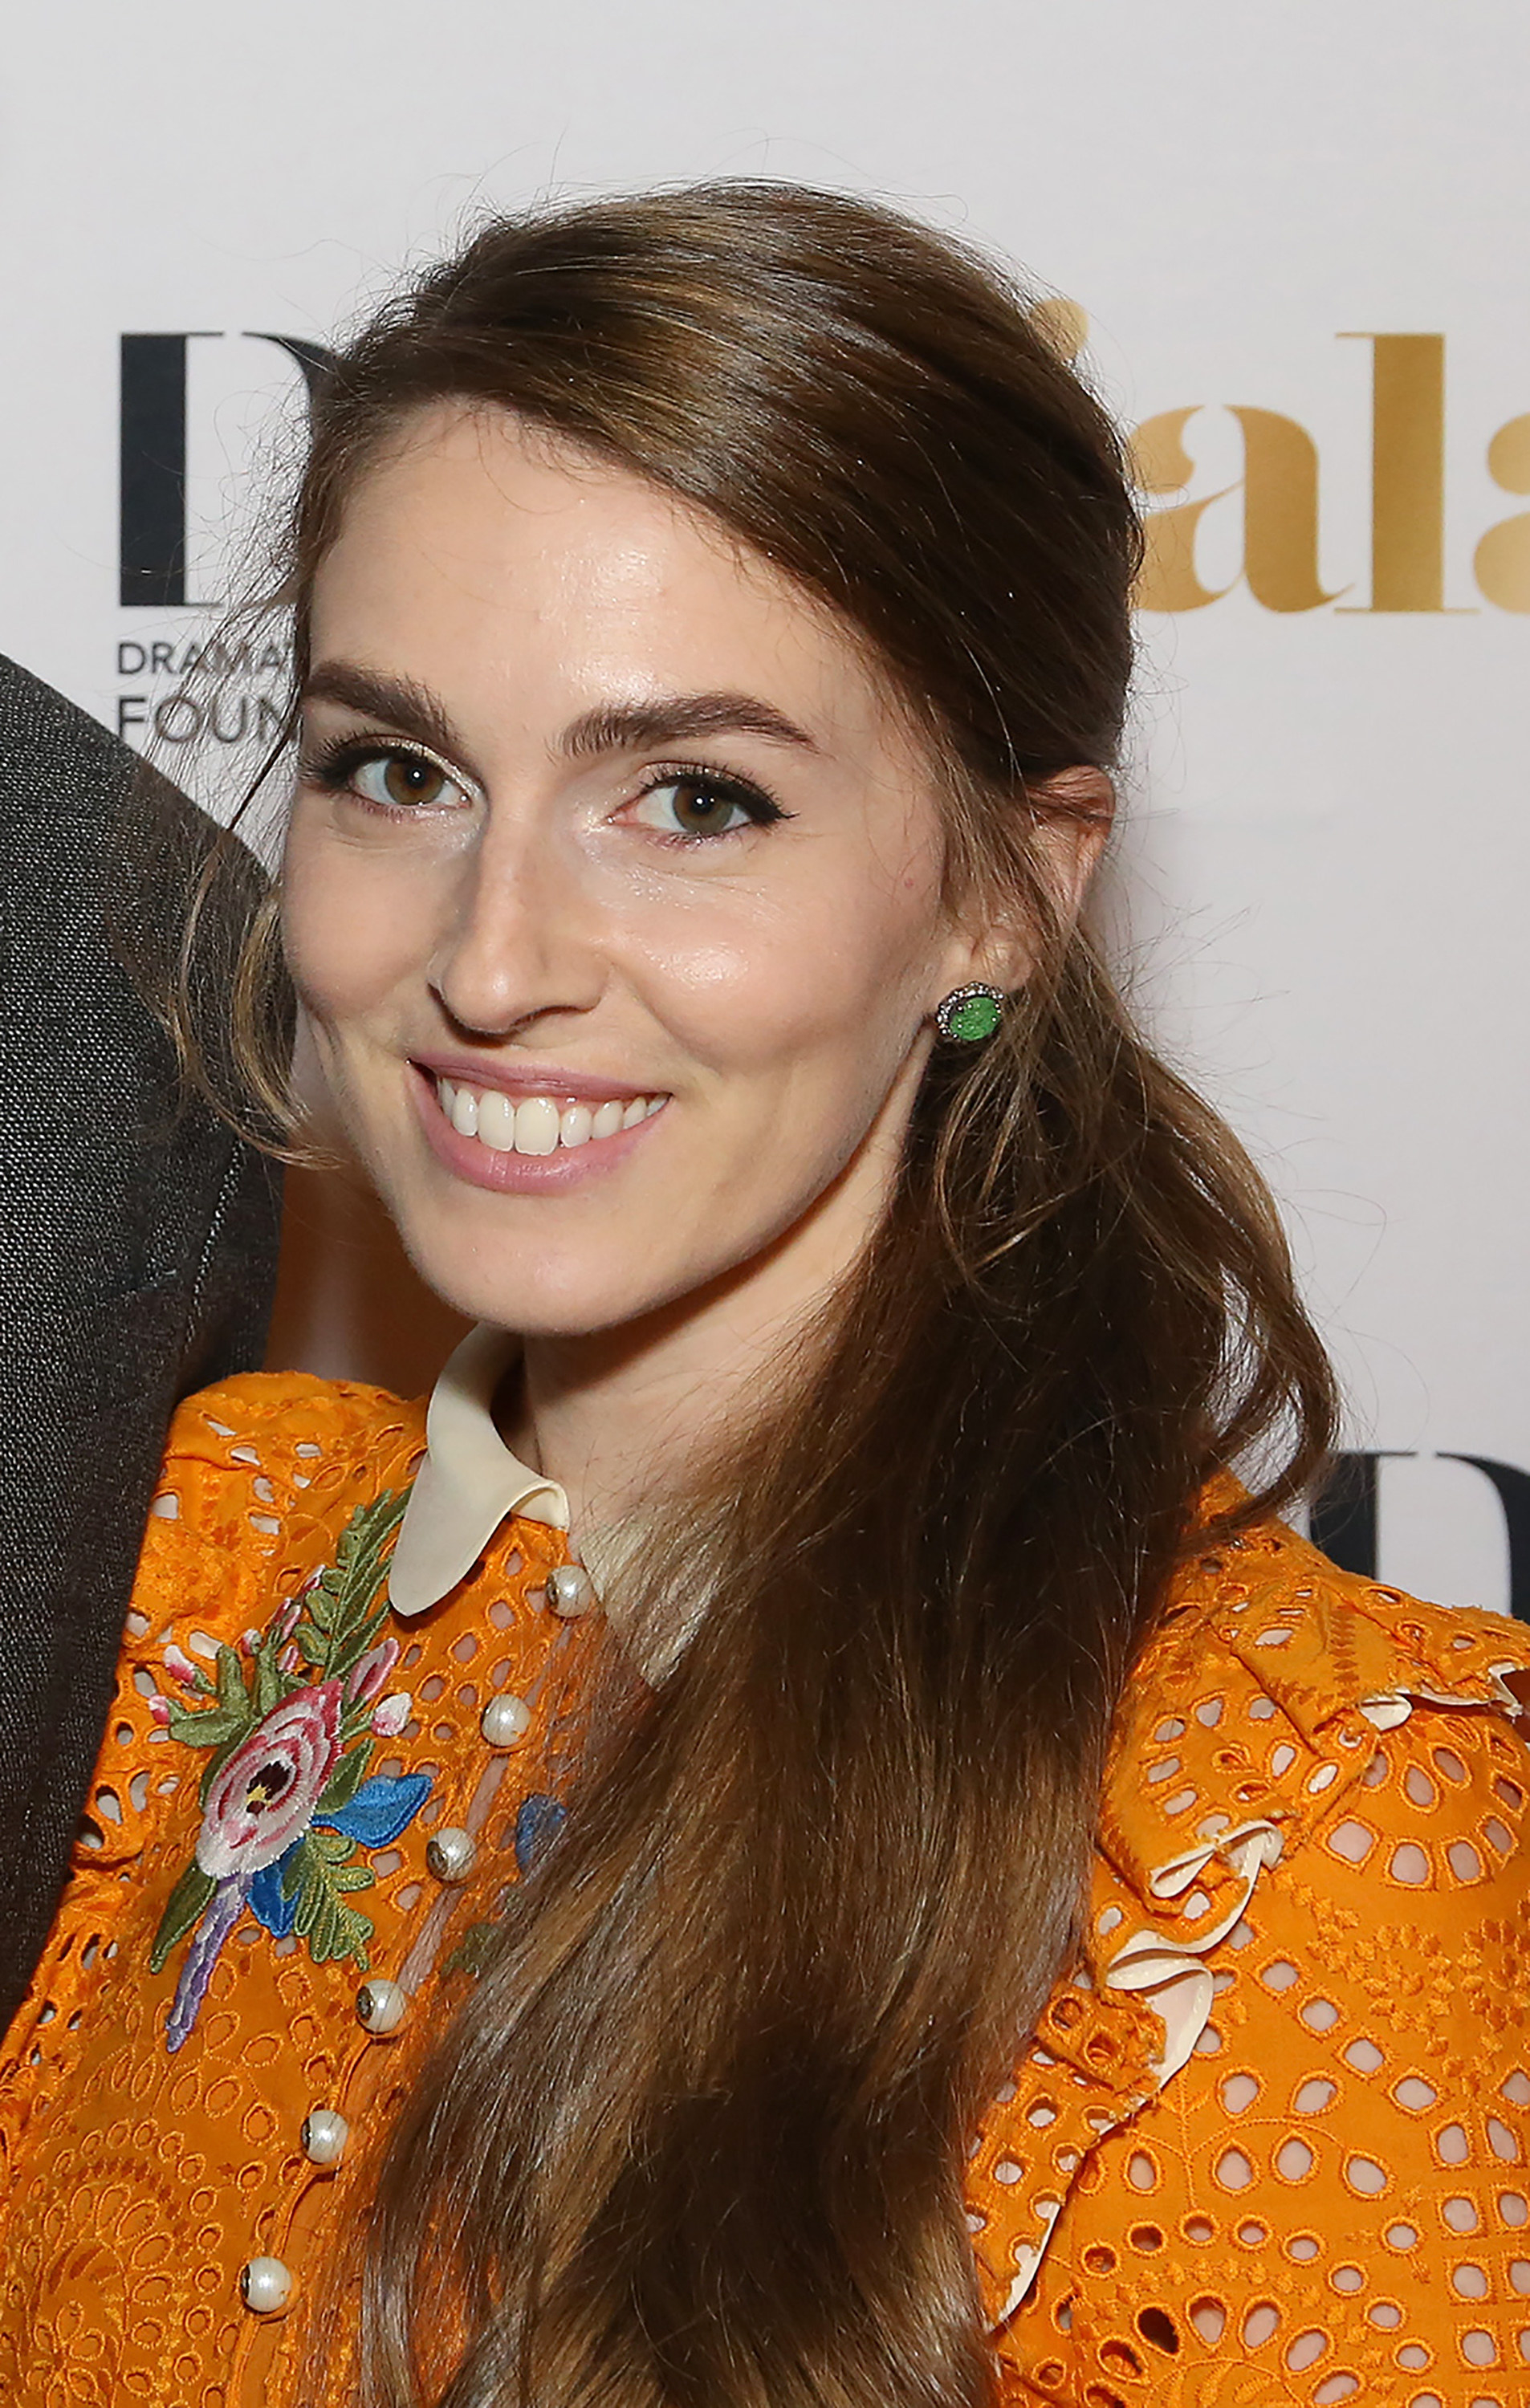 Close-up of Anna at a media event